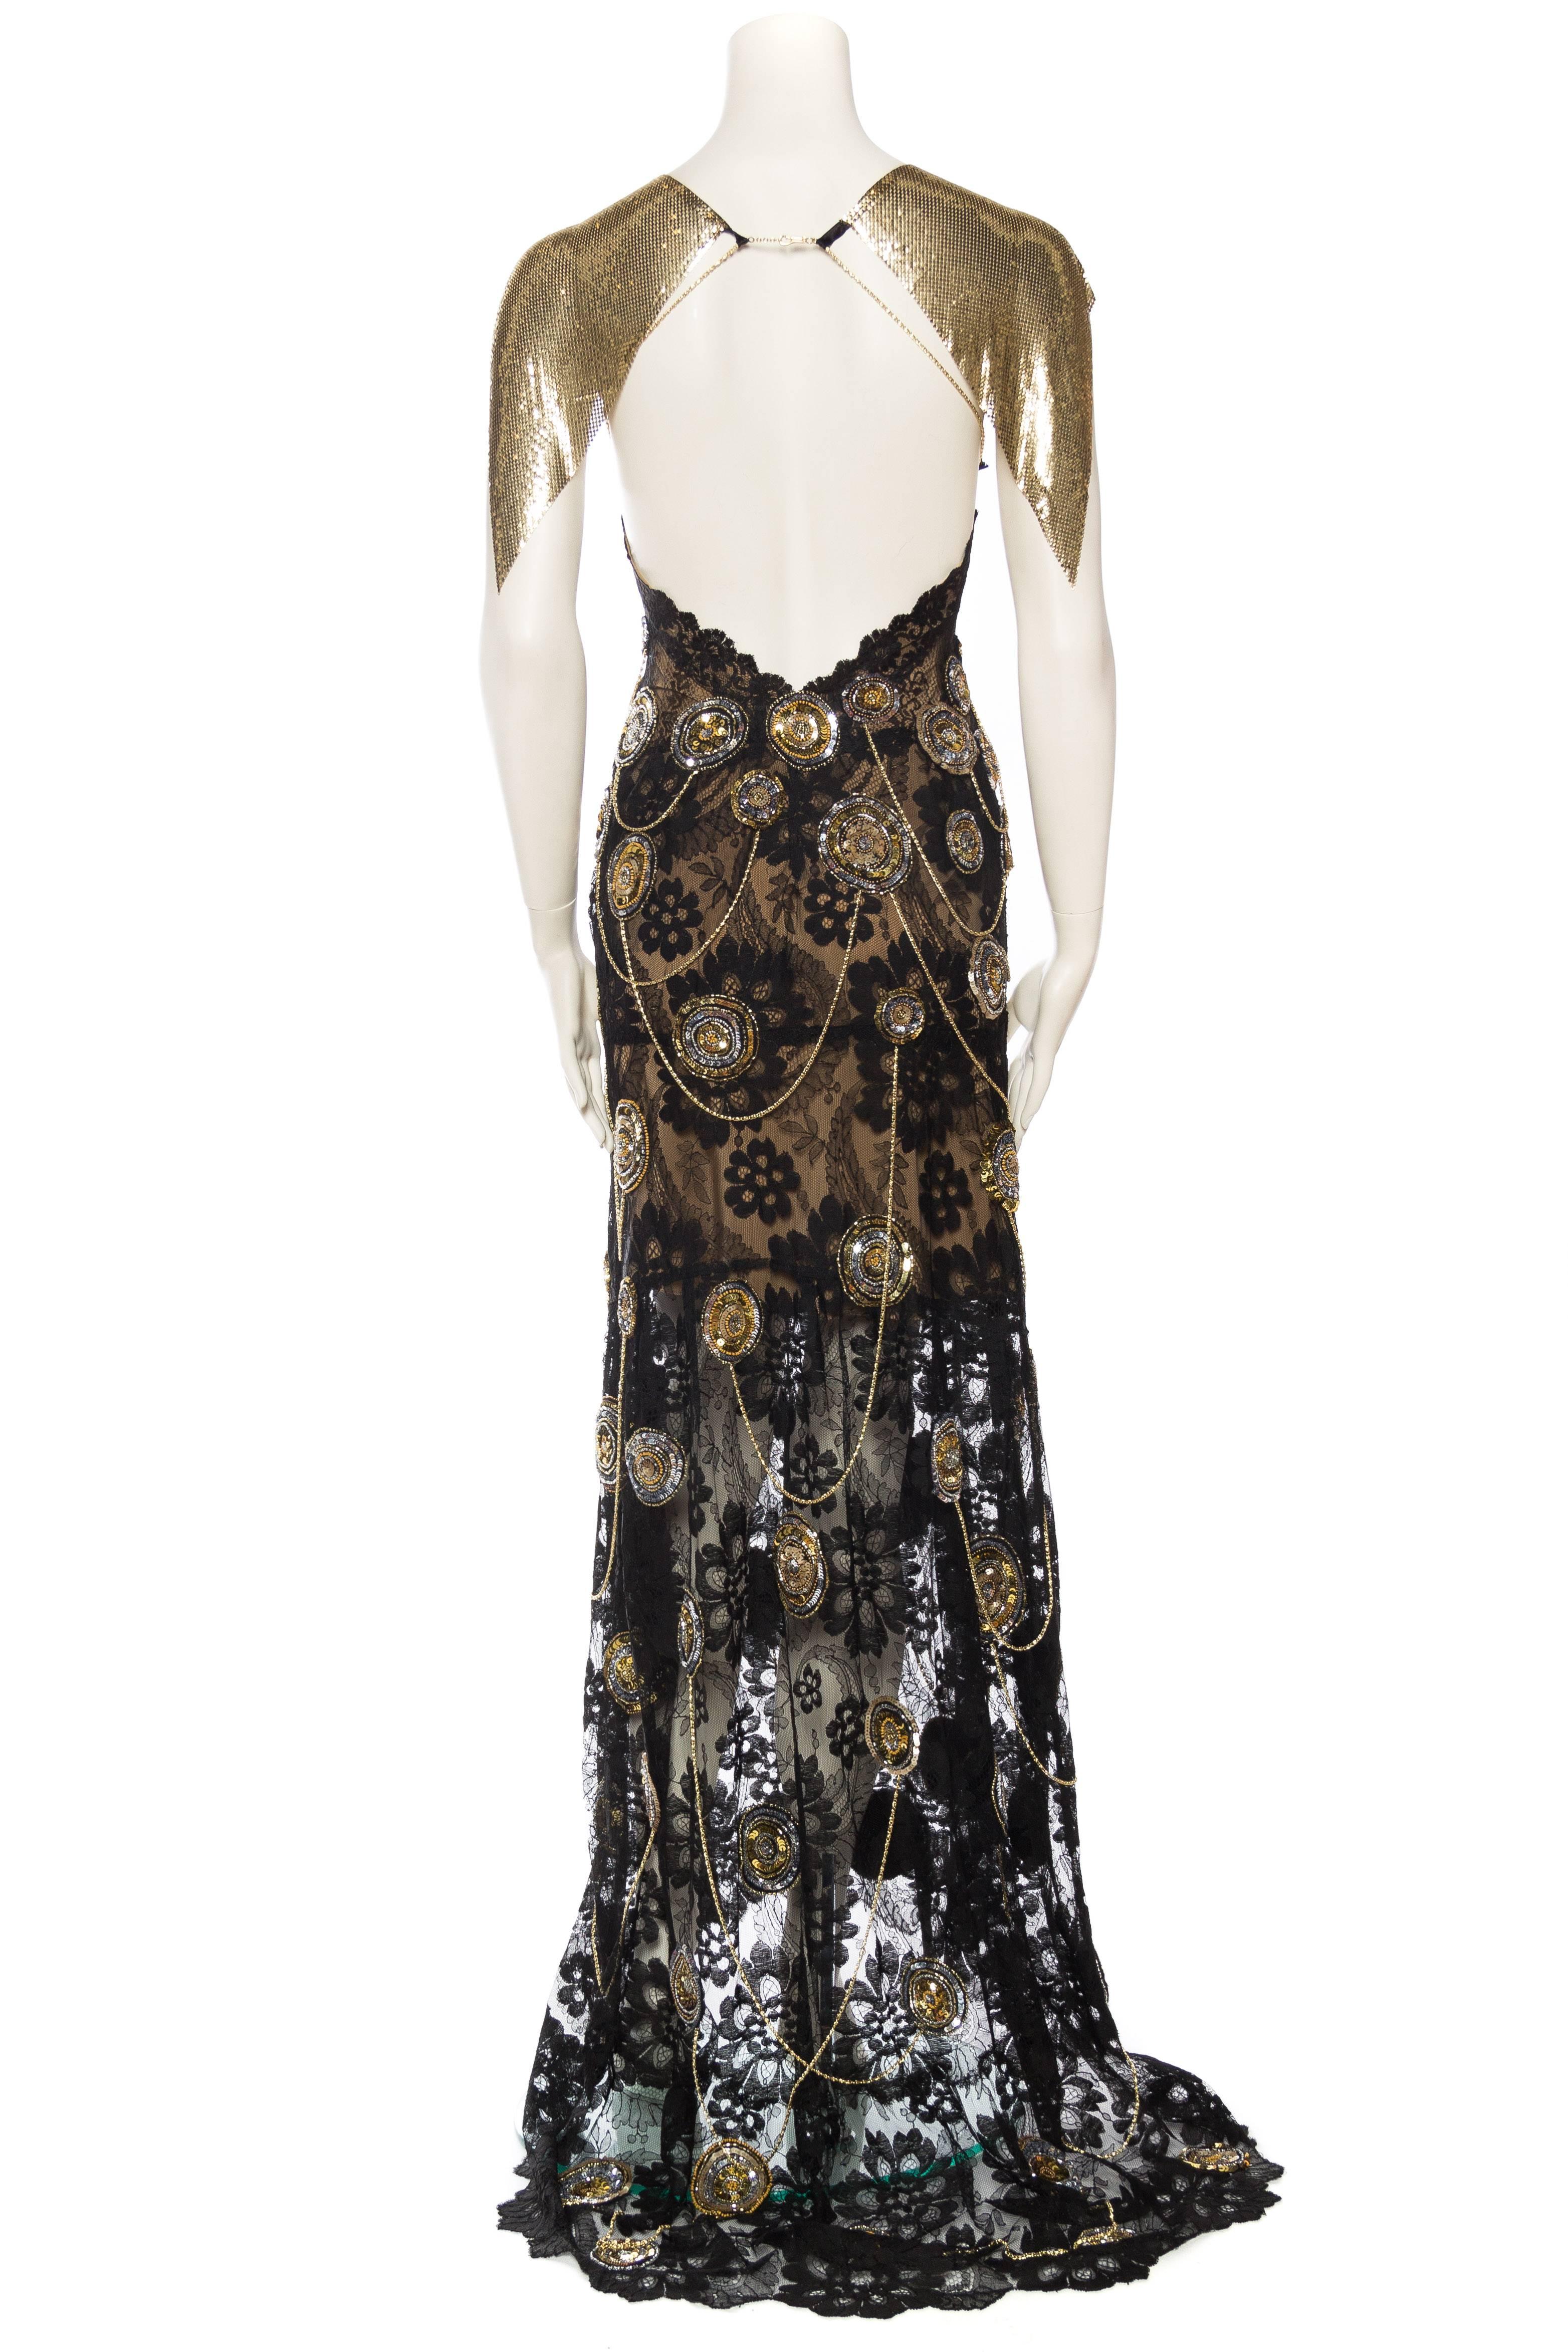 1920s lace Gown with 